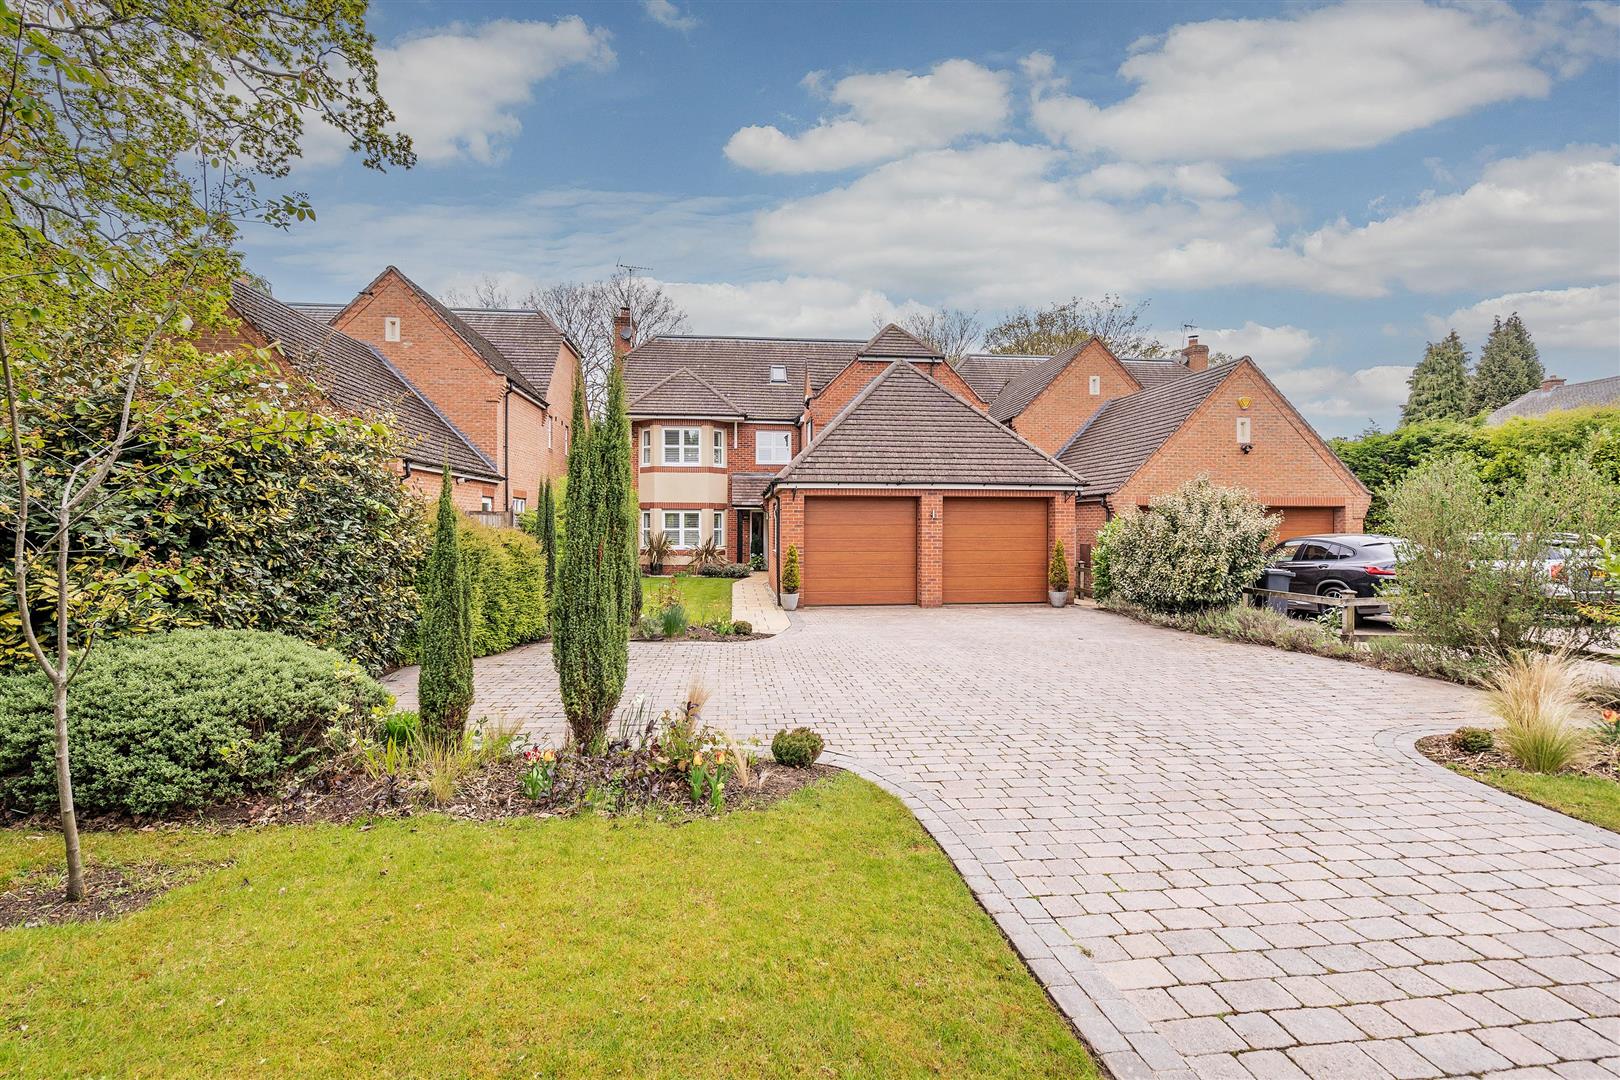 5 bed detached house for sale in St. Bernards Road, Solihull - Property Image 1